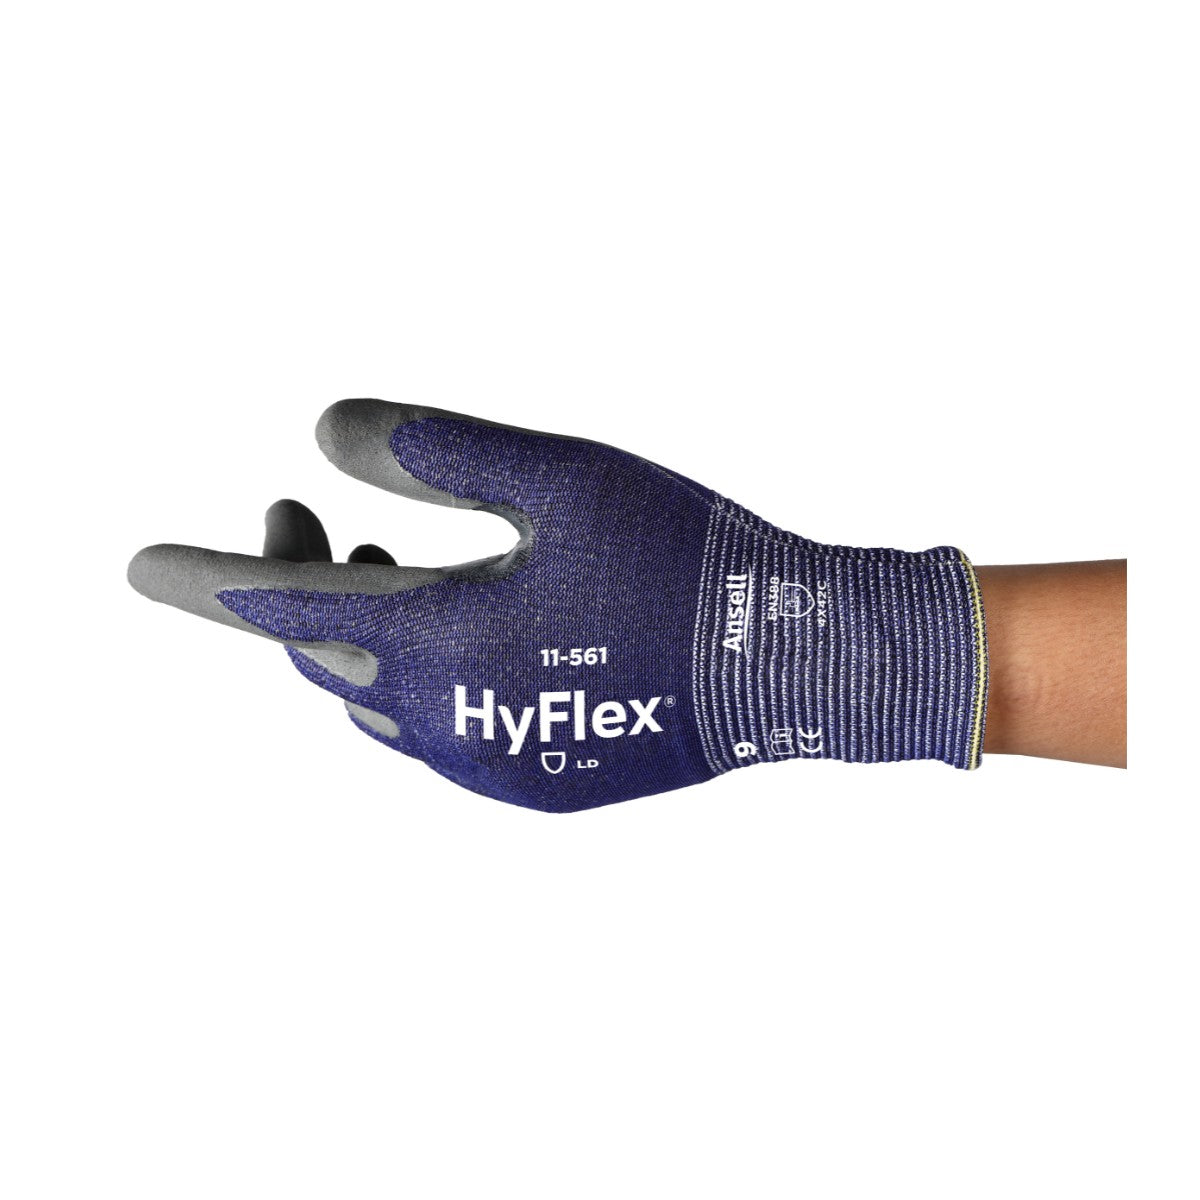 Ansell HyFlex® 11-561 (Pack of 12)